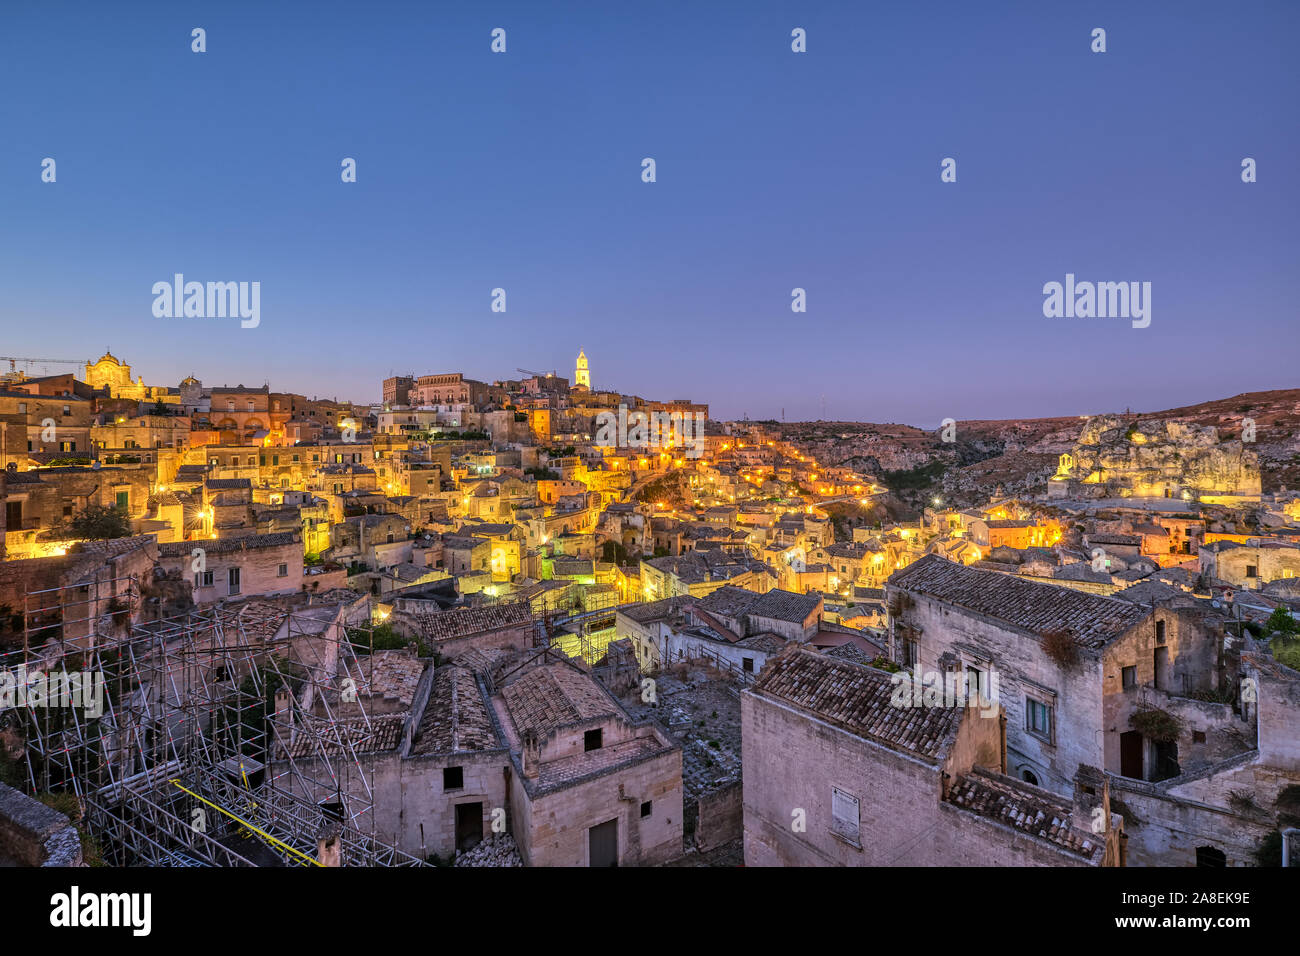 The old town of Matera in southern Italy at dusk Stock Photo